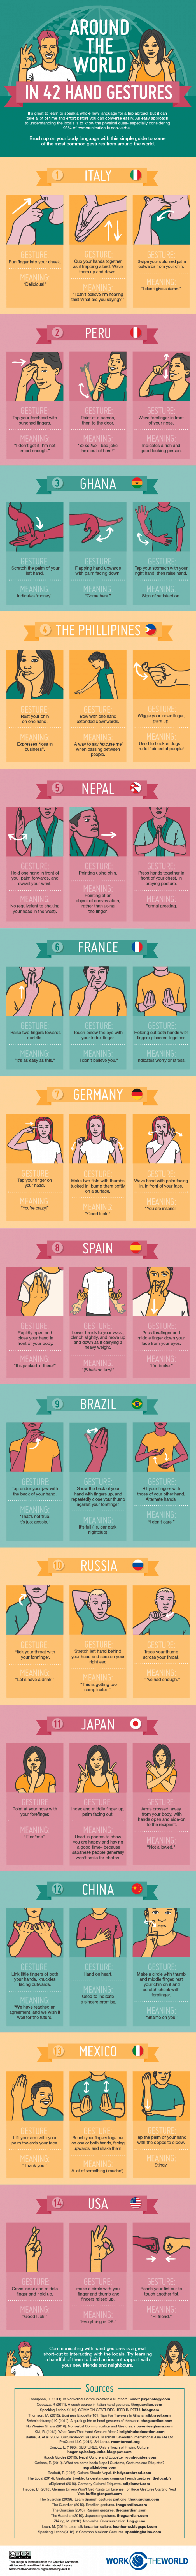 Infographic demonstrating 42 hand gestures from around the world